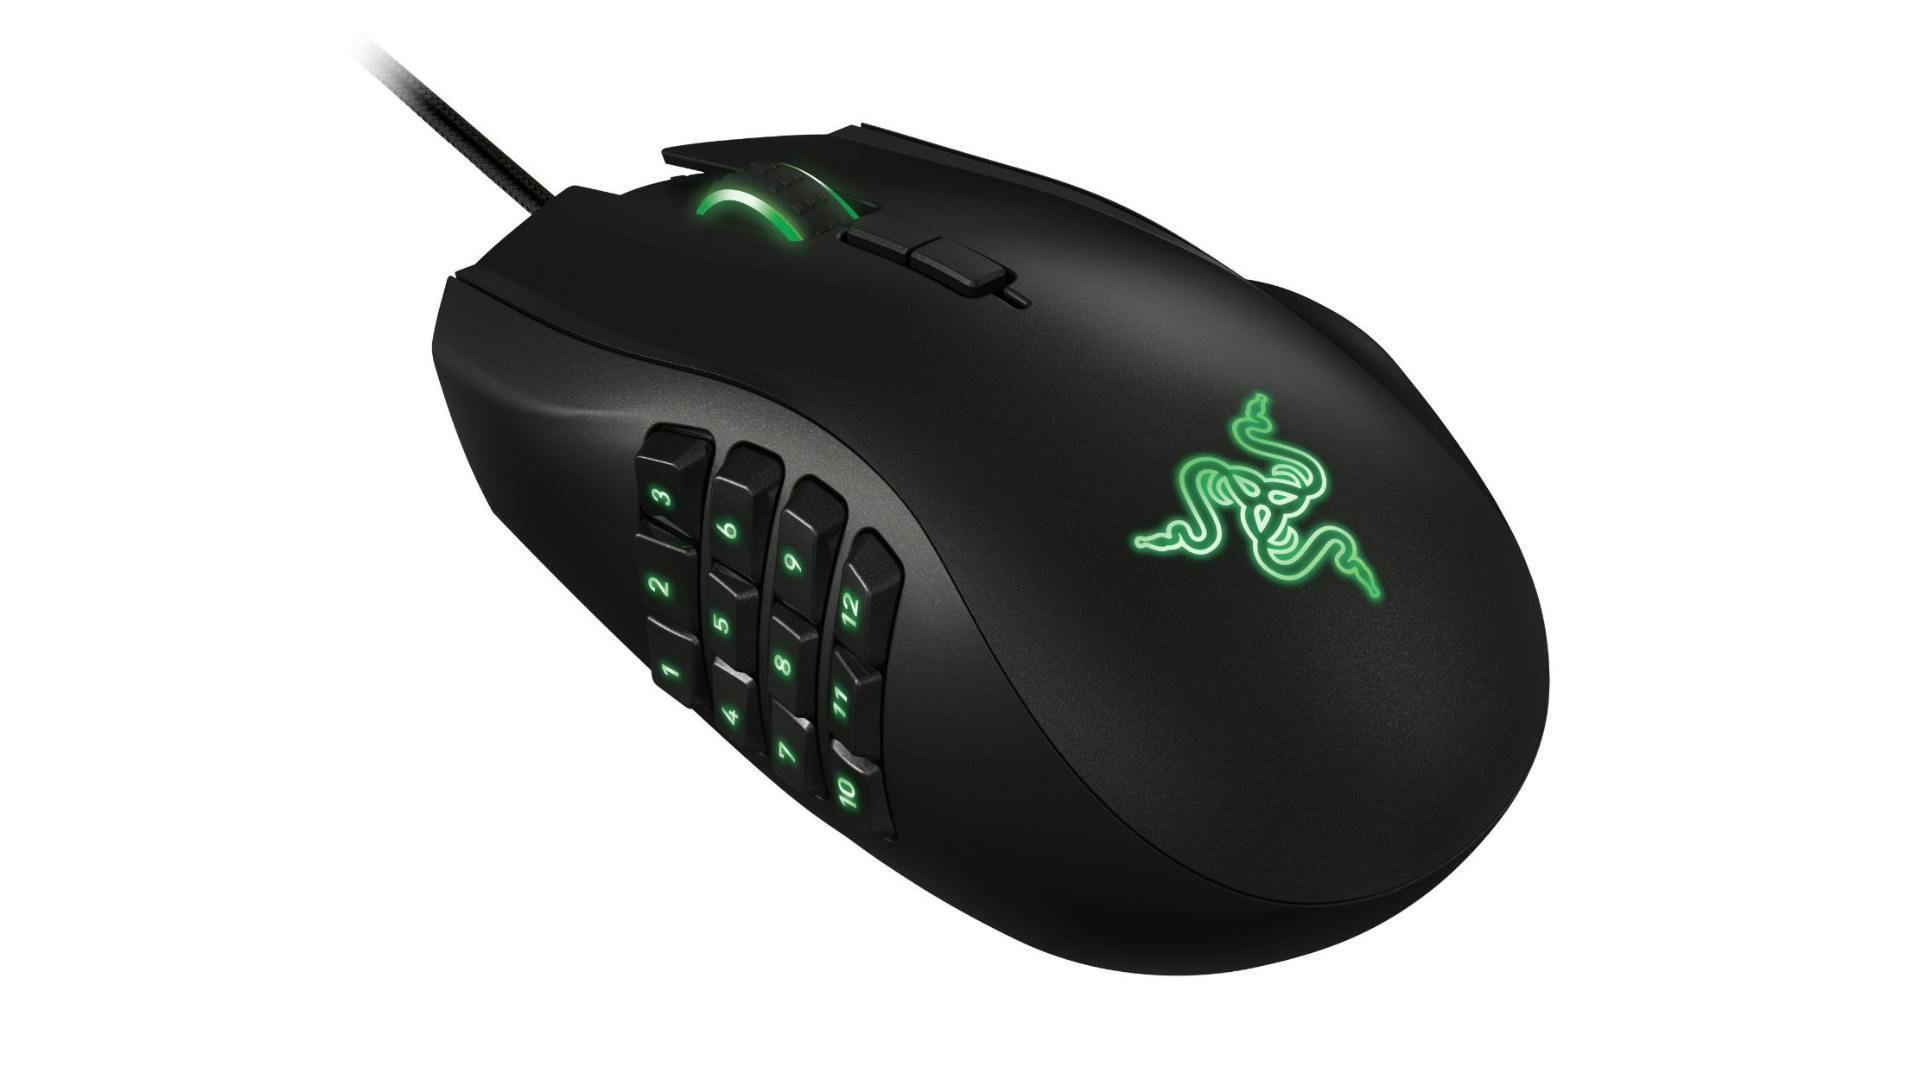 A gaming mouse viewed from the side with twelve additional buttons on the side – ideal for complex gaming mouse settings. | Credit: Wikipedia.